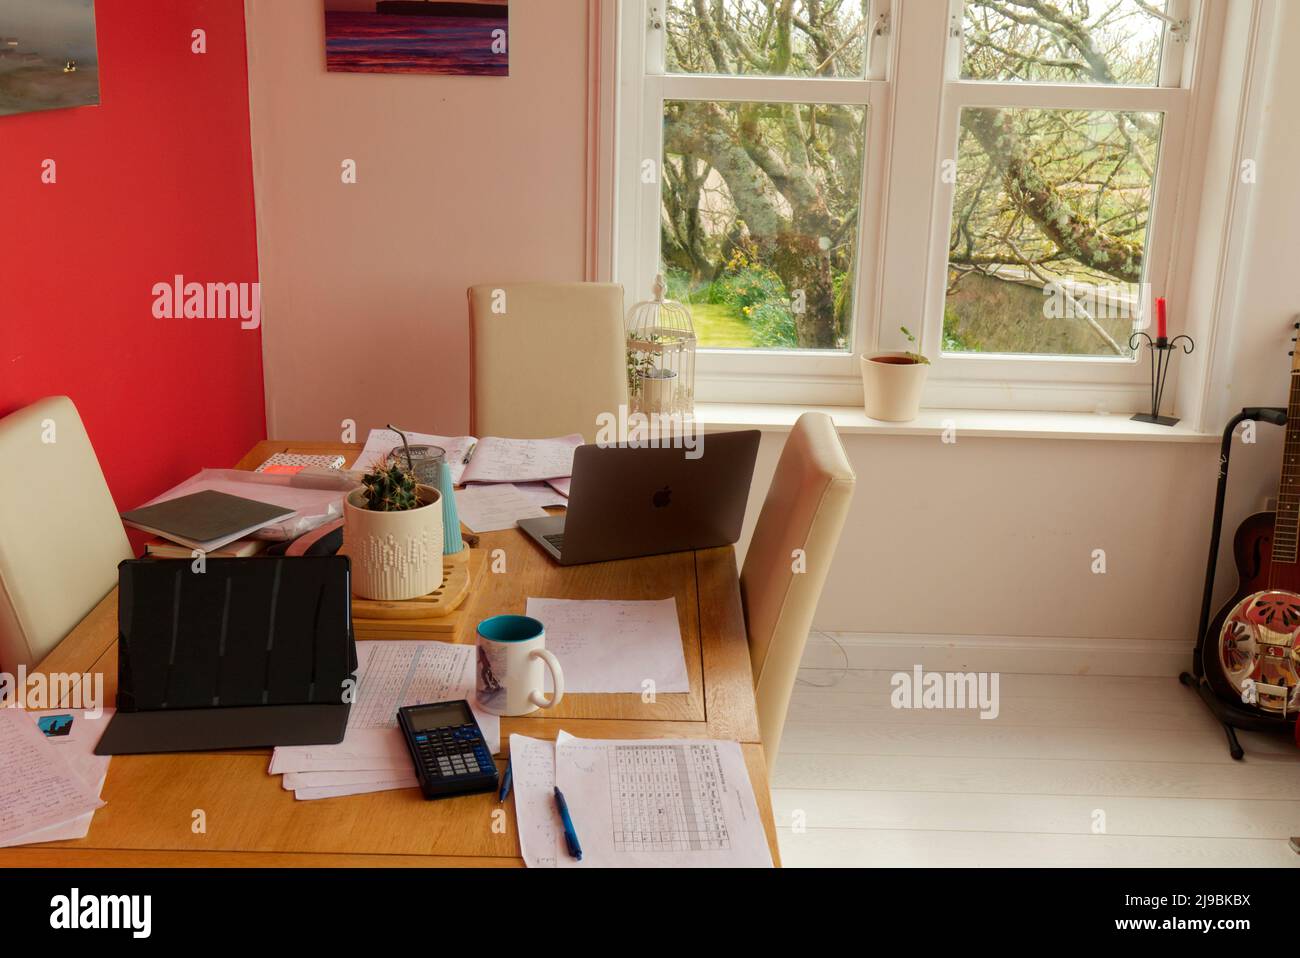 Home office environment Stock Photo